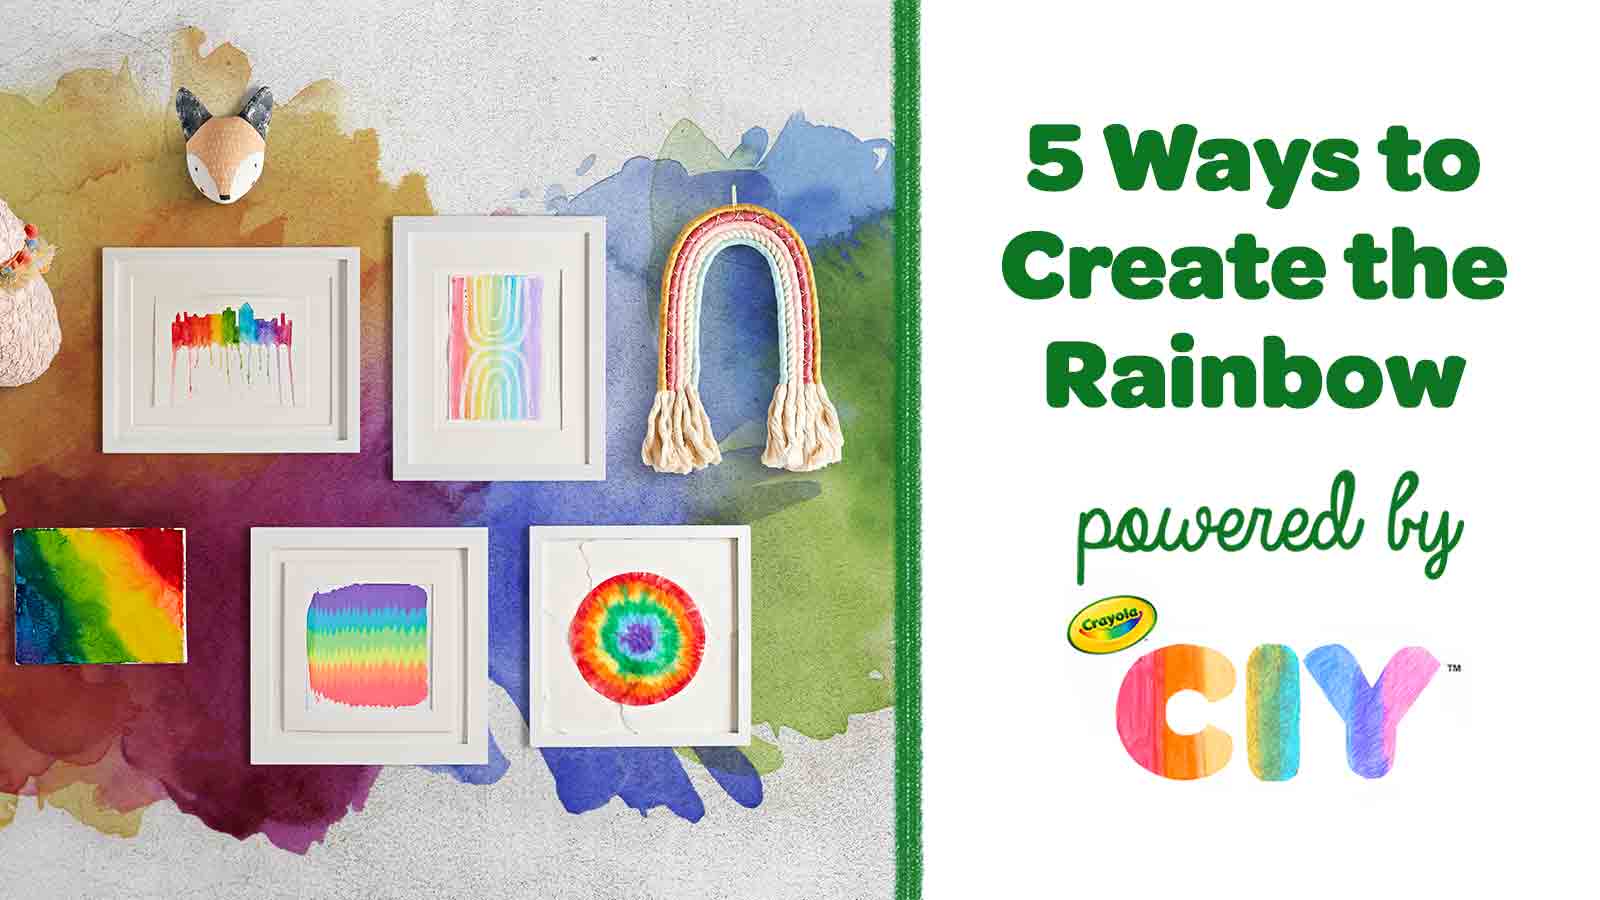 5-Ways-to-Create-the-Rainbow_Poster-Frame